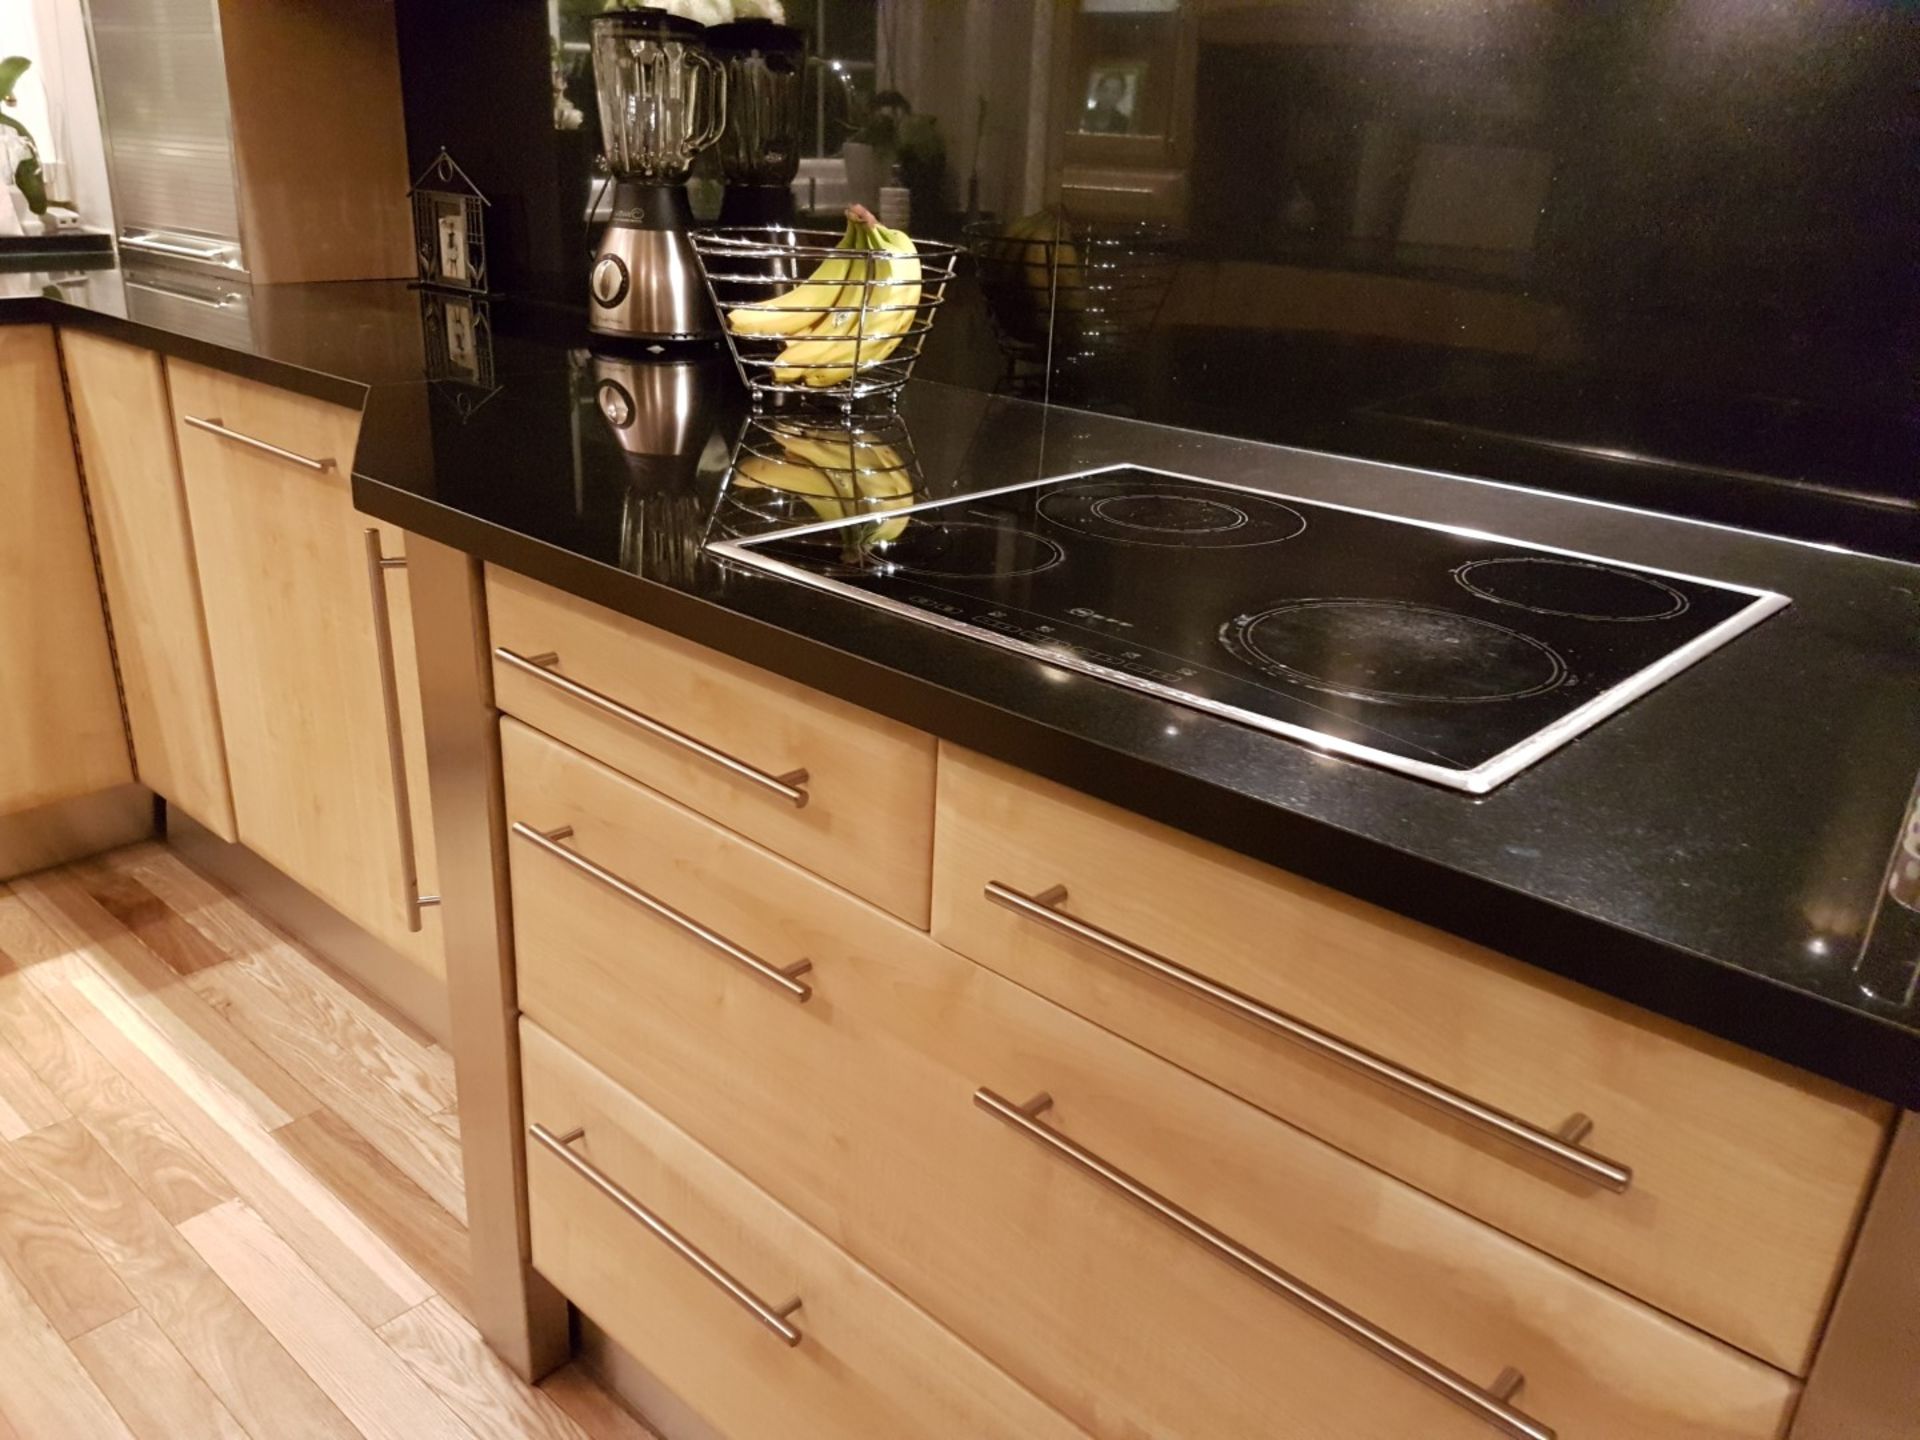 1 x Bespoke Fitted Kitchen With Granite Worktops And Integral NEFF Appliances - CL216 - Location: - Image 39 of 46